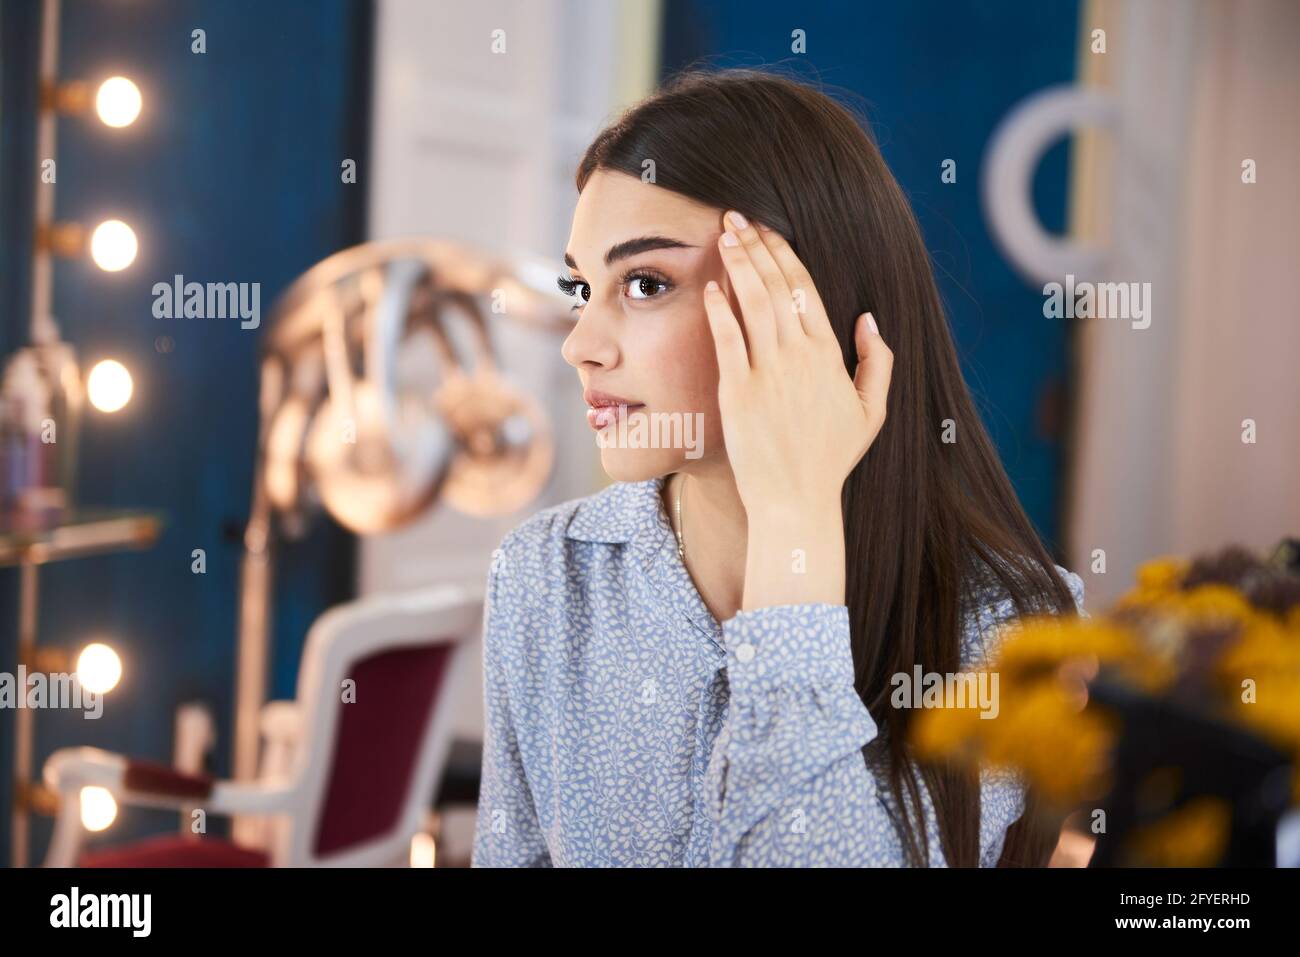 A woman checking her eyebrows at the beauty salon Stock Photo